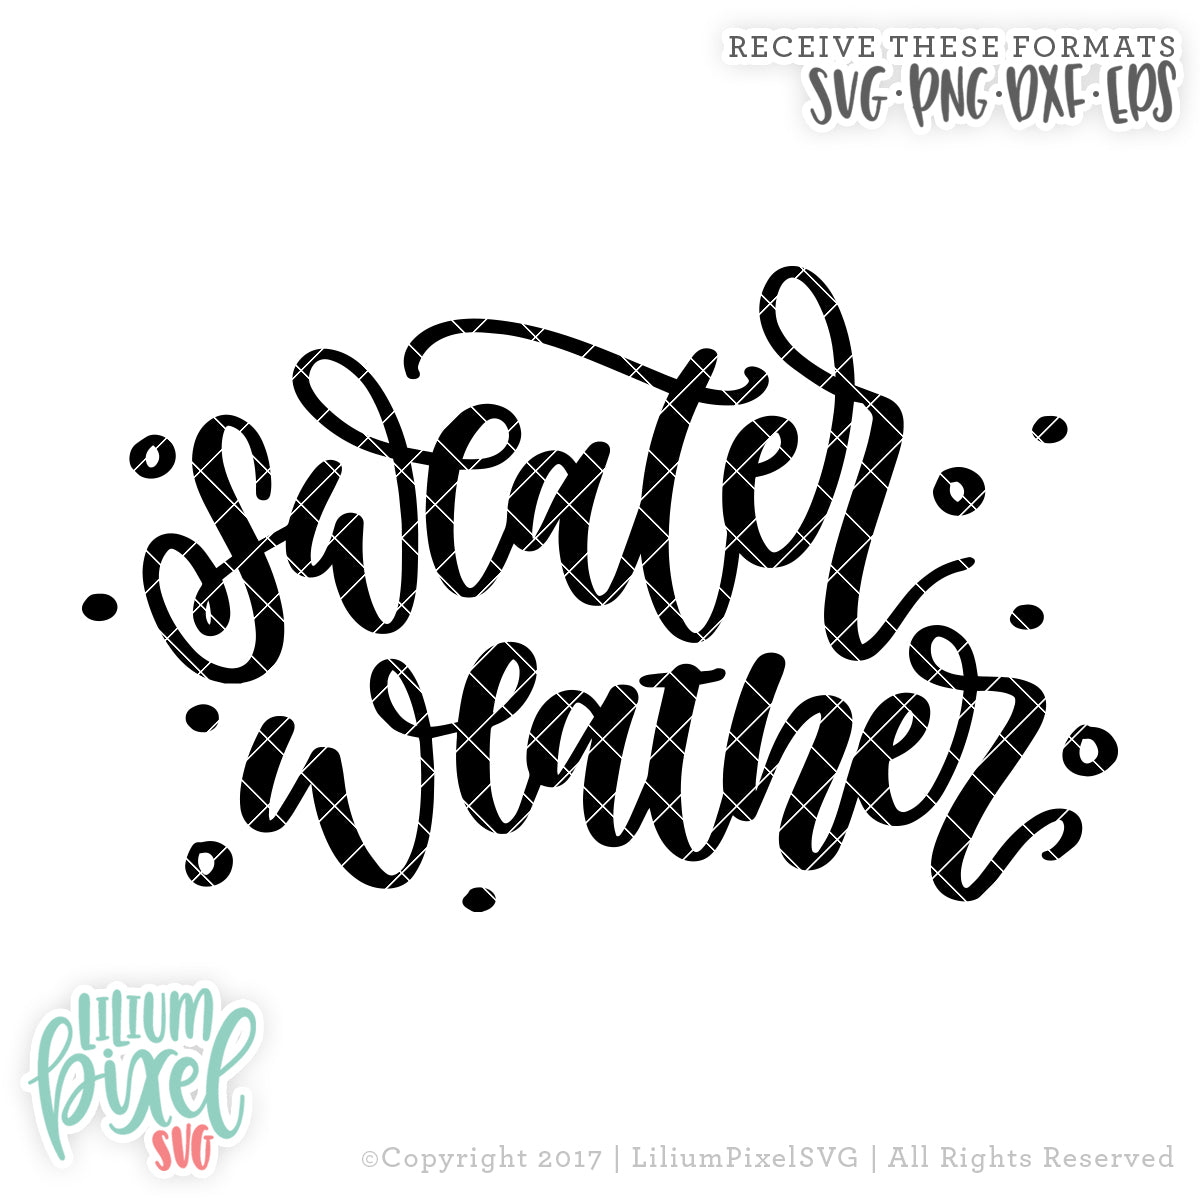 Sweater Weather - SVG PNG DXF EPS Cut File • Silhouette • Cricut • More